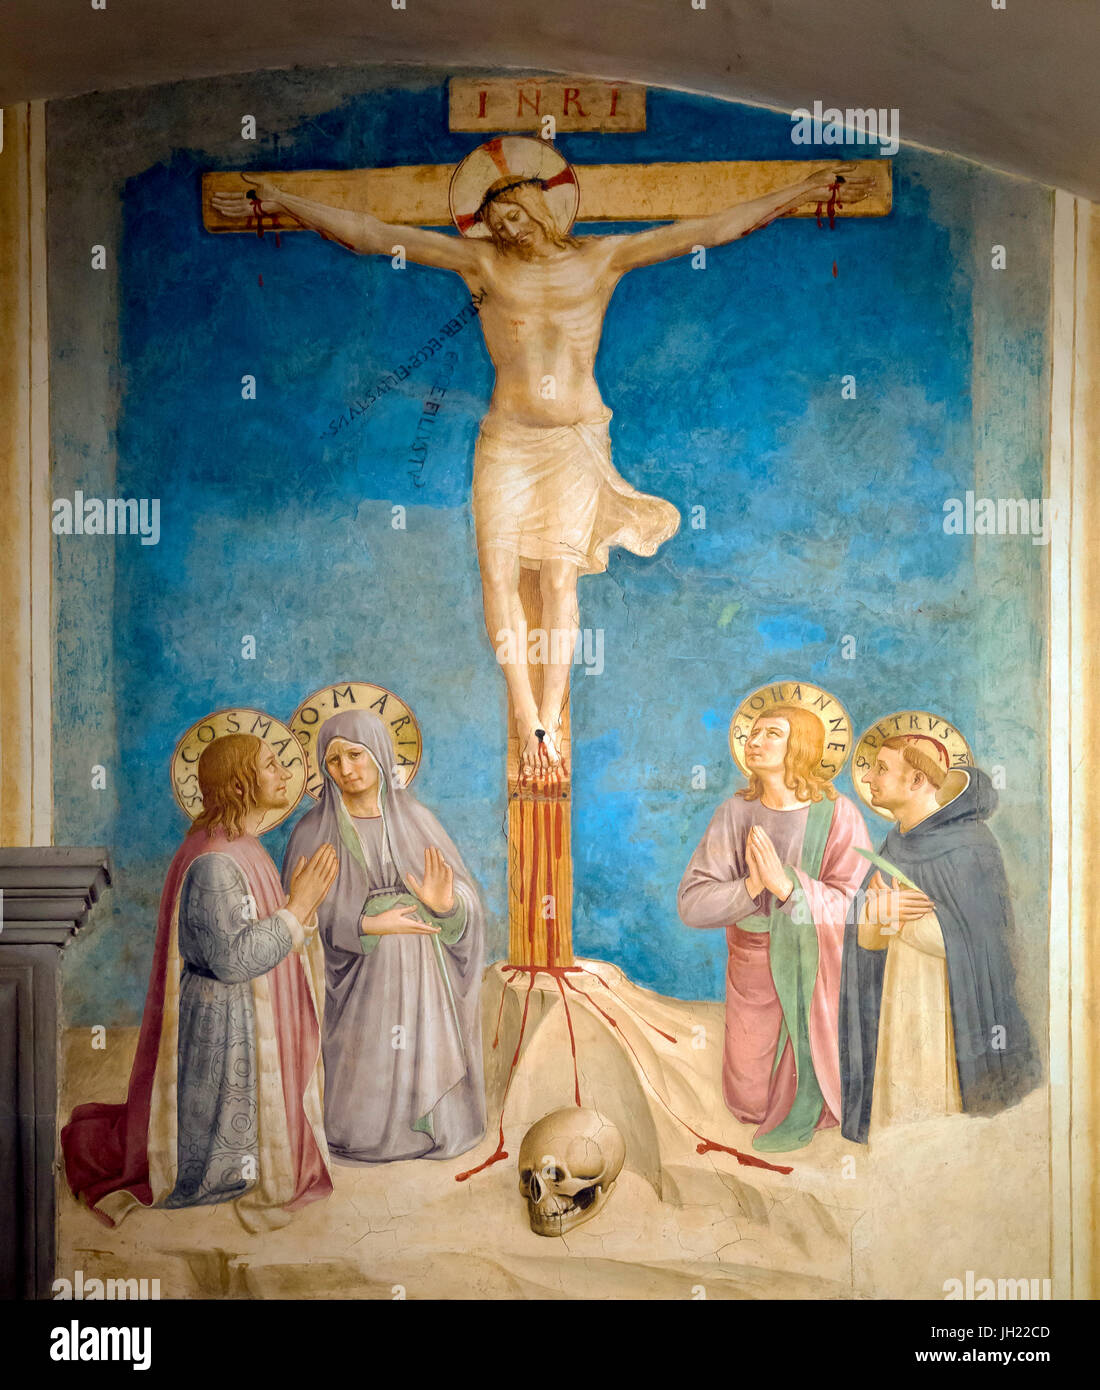 Crucifixion with the Virgin and Saints Cosmas, John the Evangelist and Peter Martyr, Cell 38, by Fra Beato Angelico, 1441-1442, Convent of San Marco,  Stock Photo